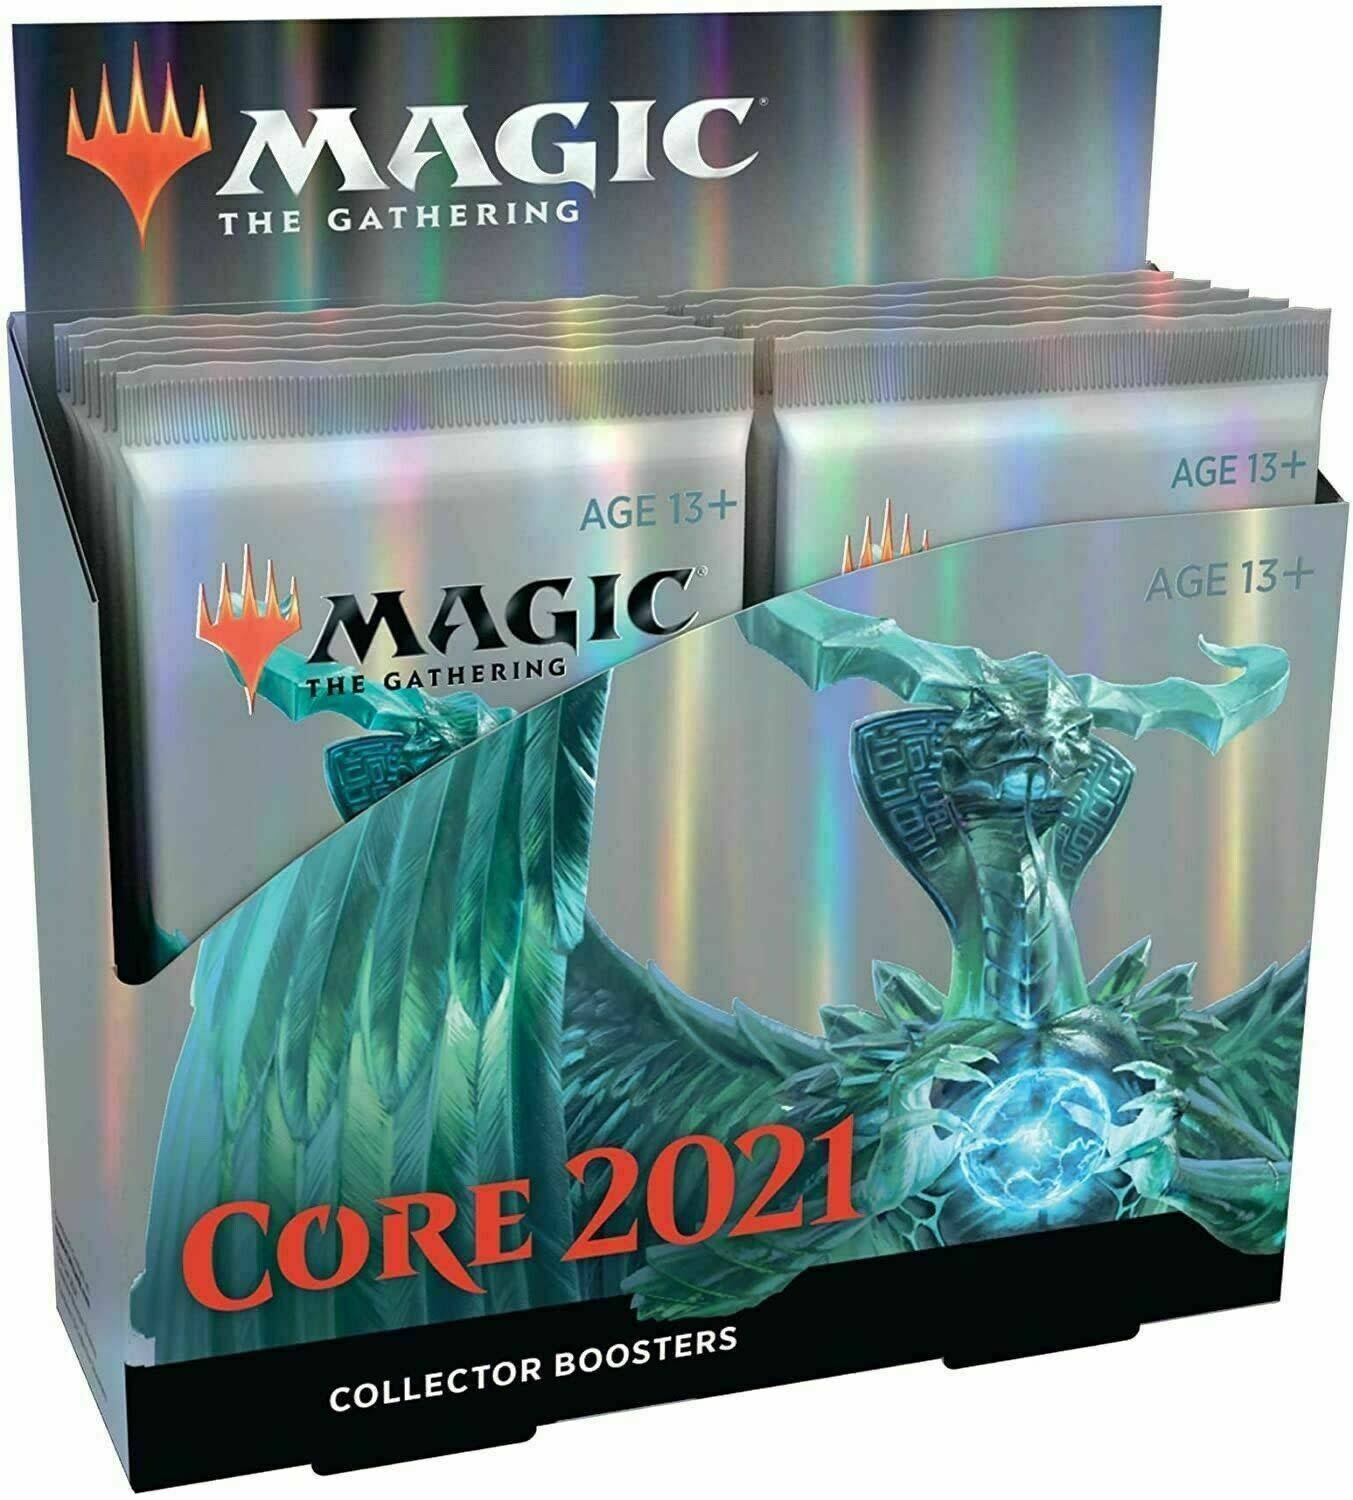 Magic: The Gathering - Collector Booster Box - CORE 2021